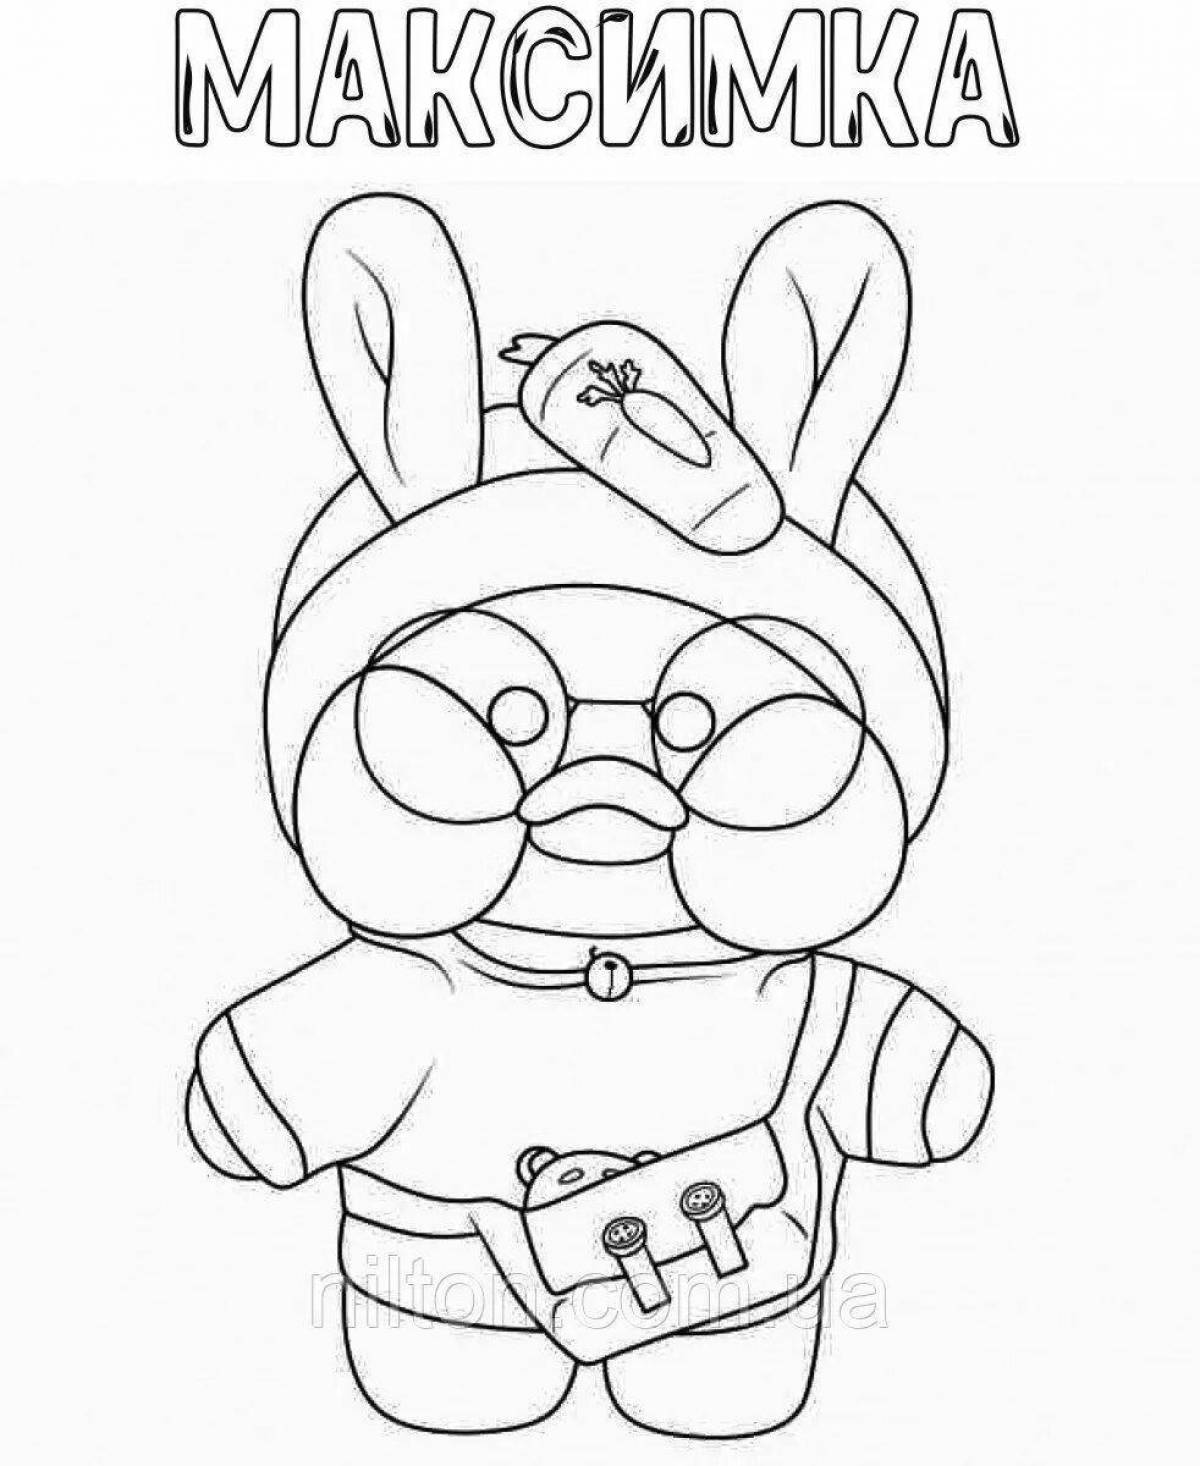 Lalafanfan bright mini duck coloring page